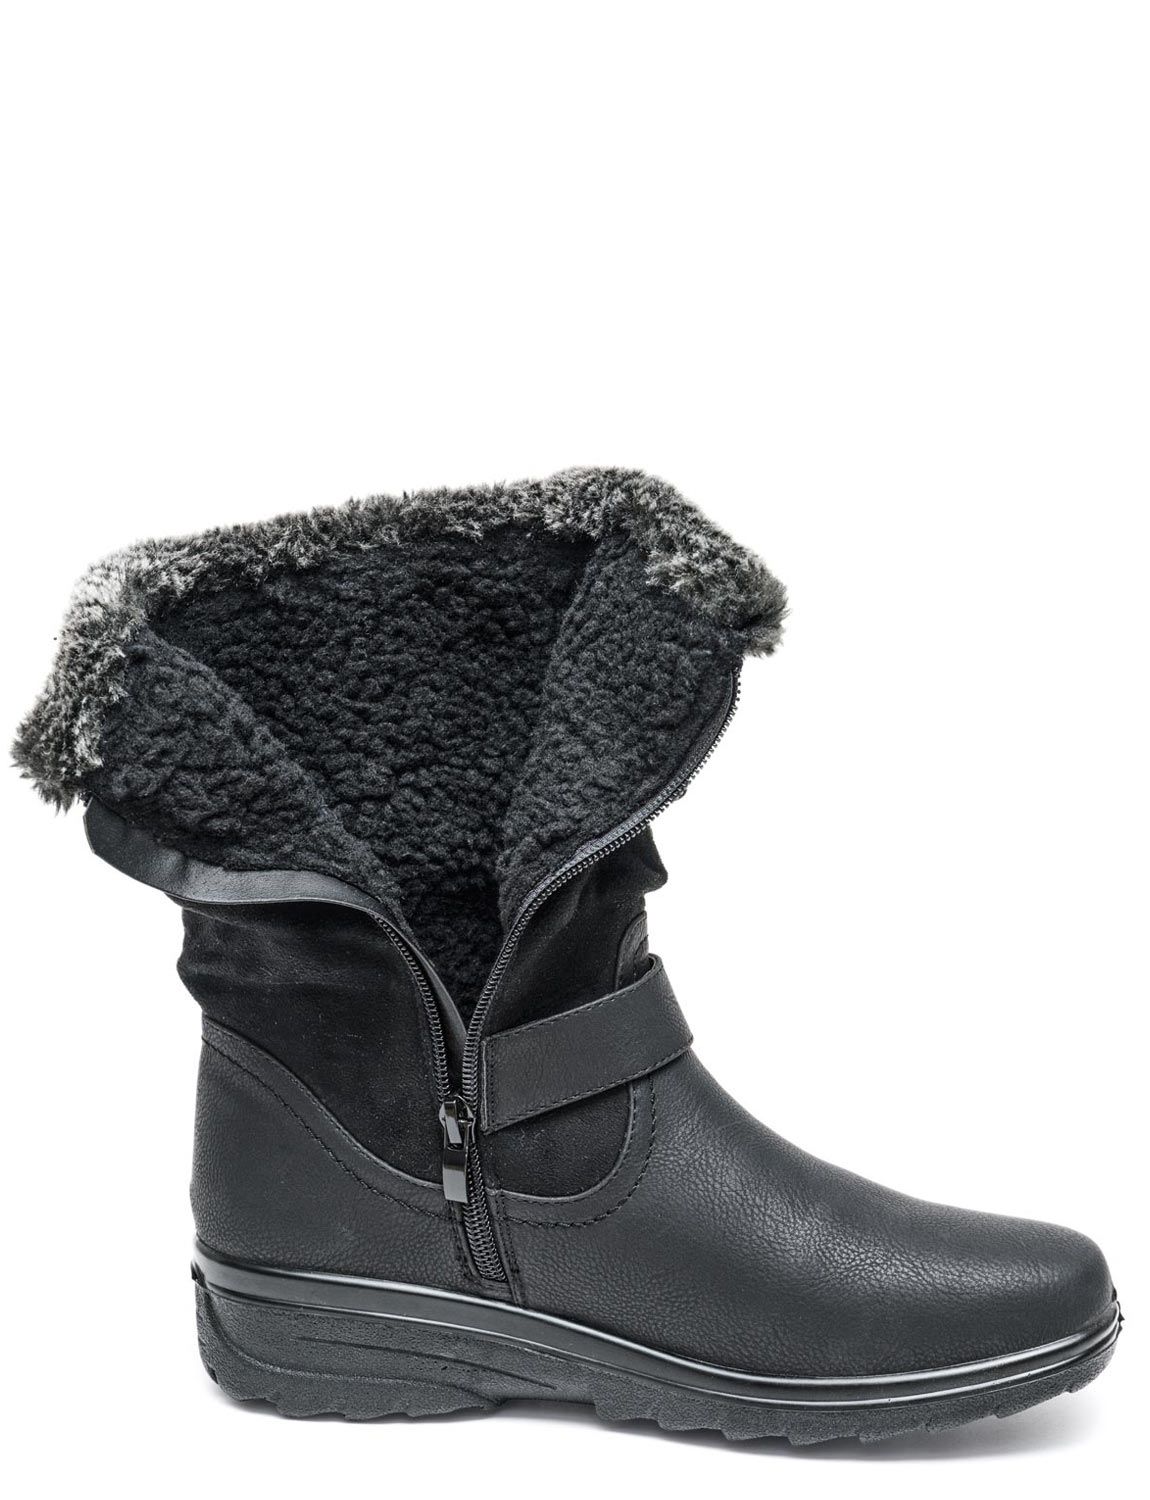 Cushion Walk Thermal Lined Boot | Chums